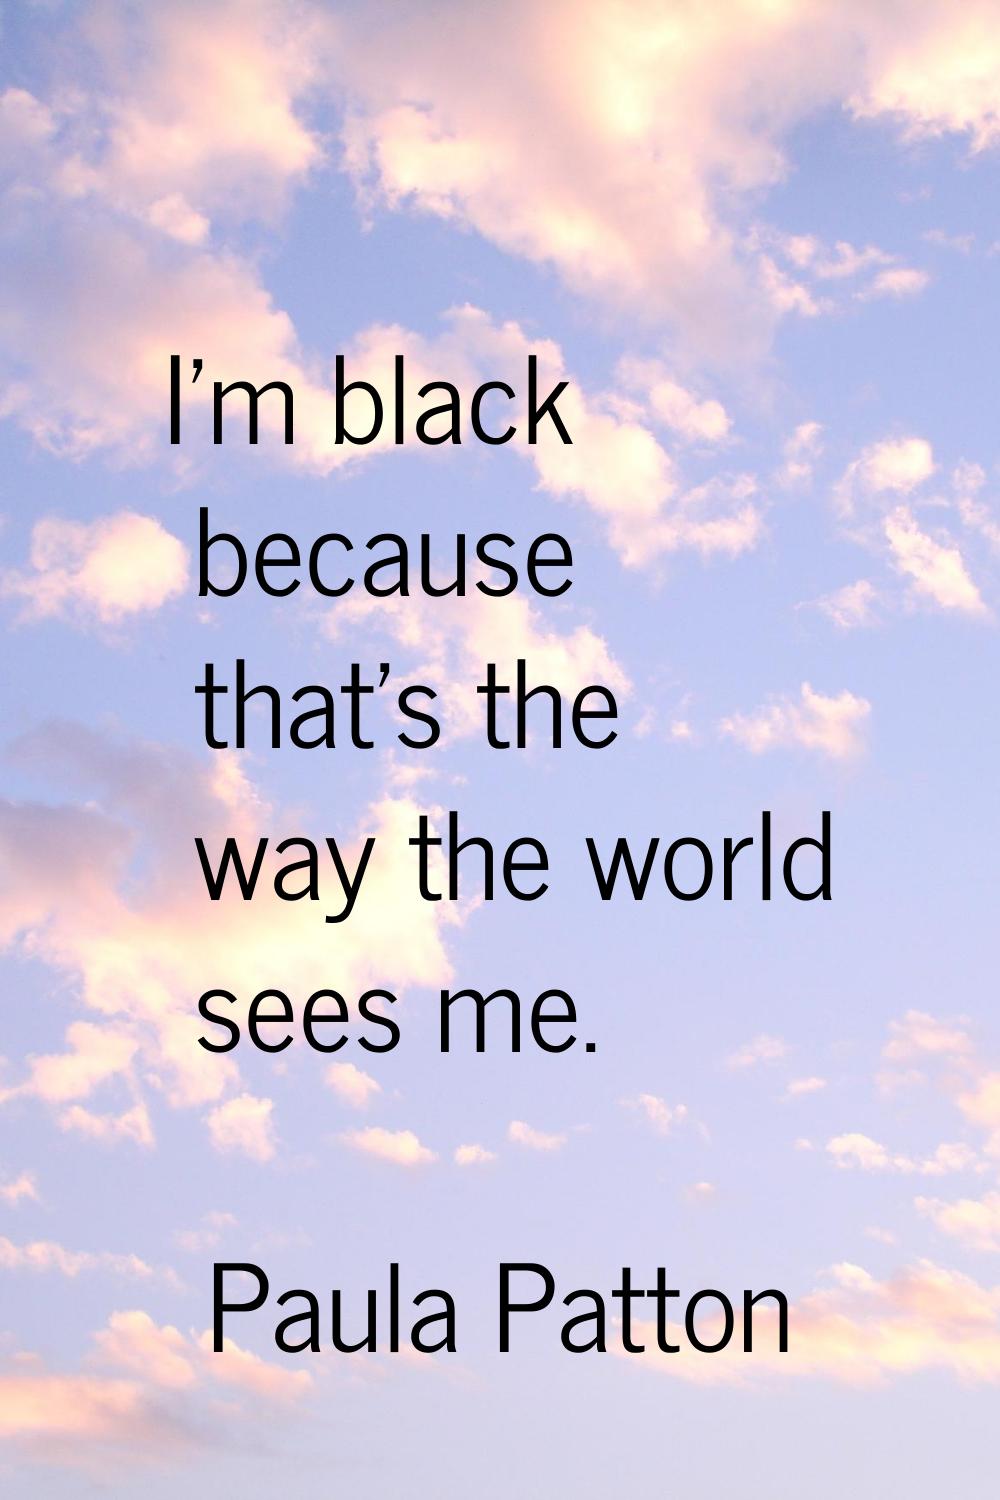 I'm black because that's the way the world sees me.